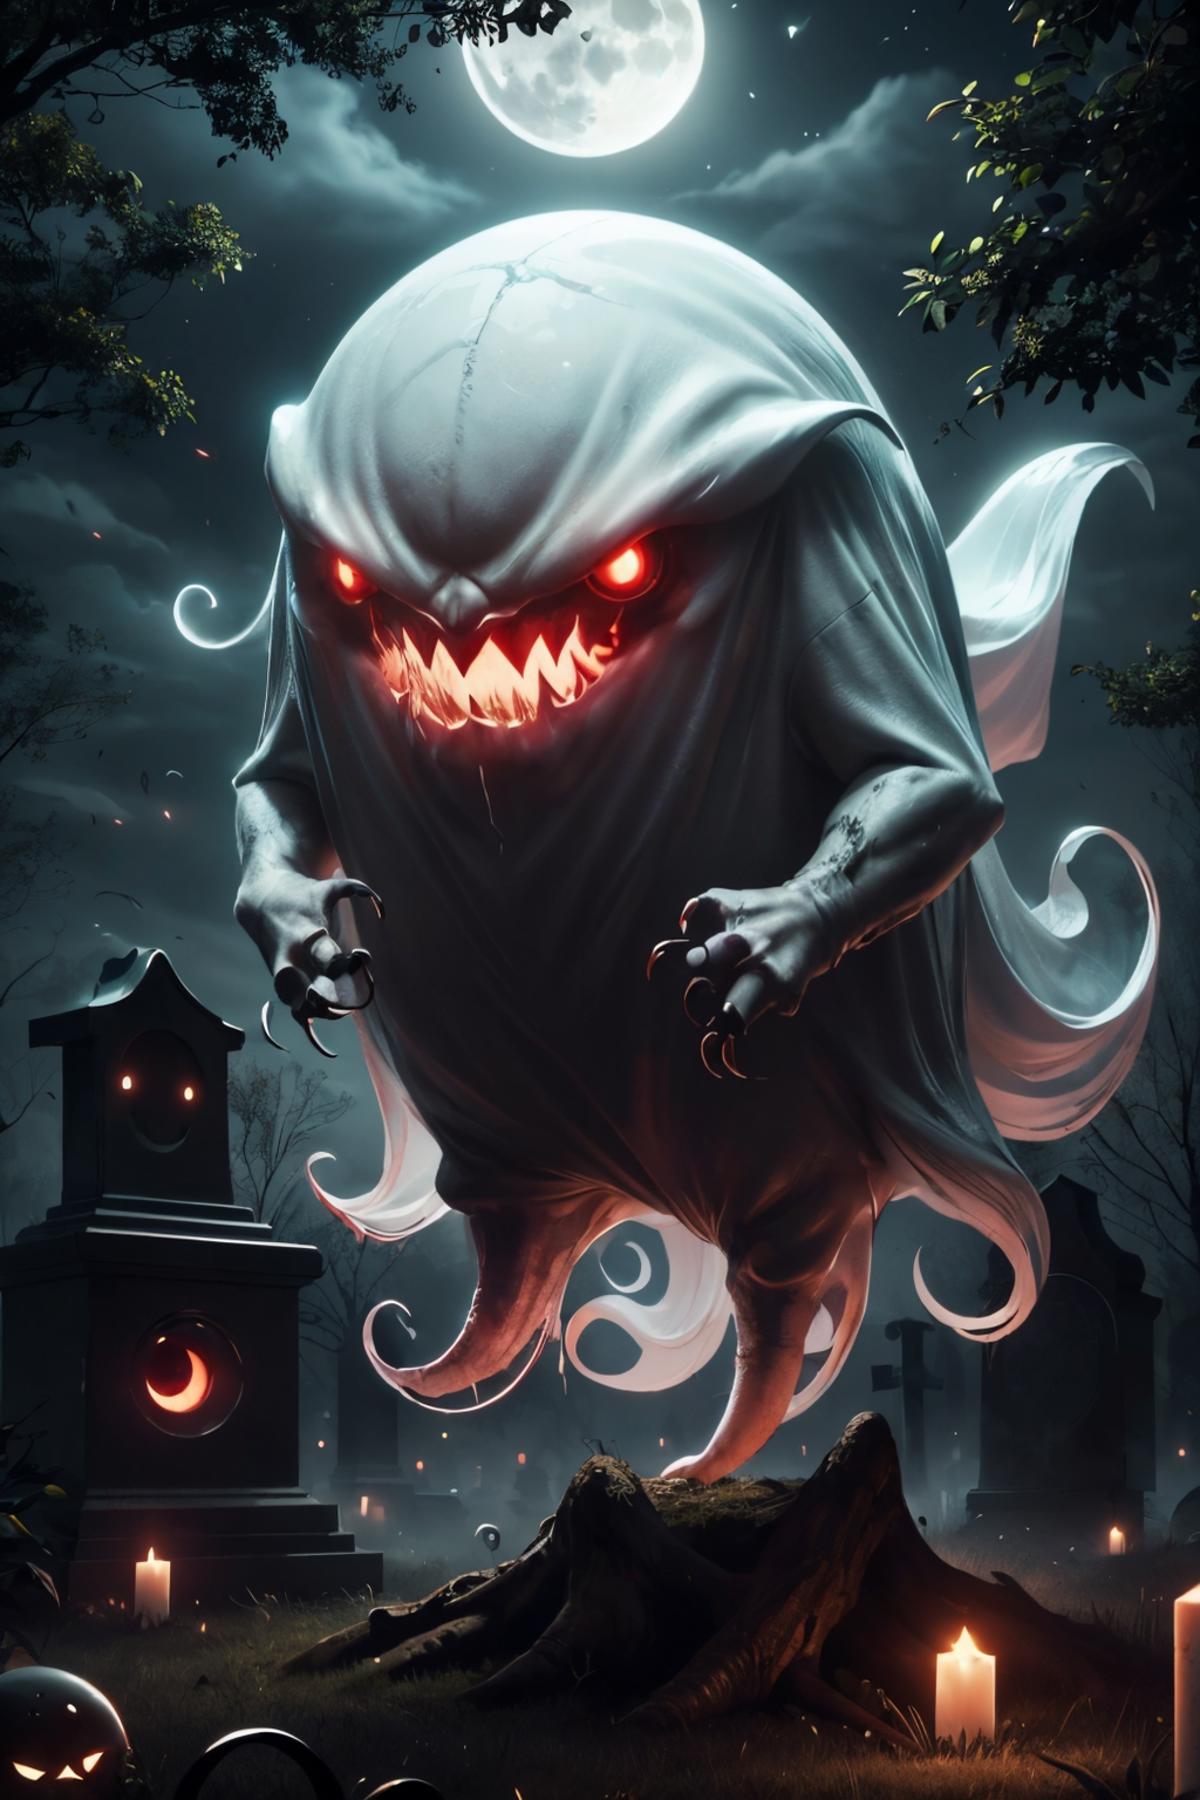 A giant, angry, and scary ghost with red eyes and sharp teeth stands next to a cemetery.